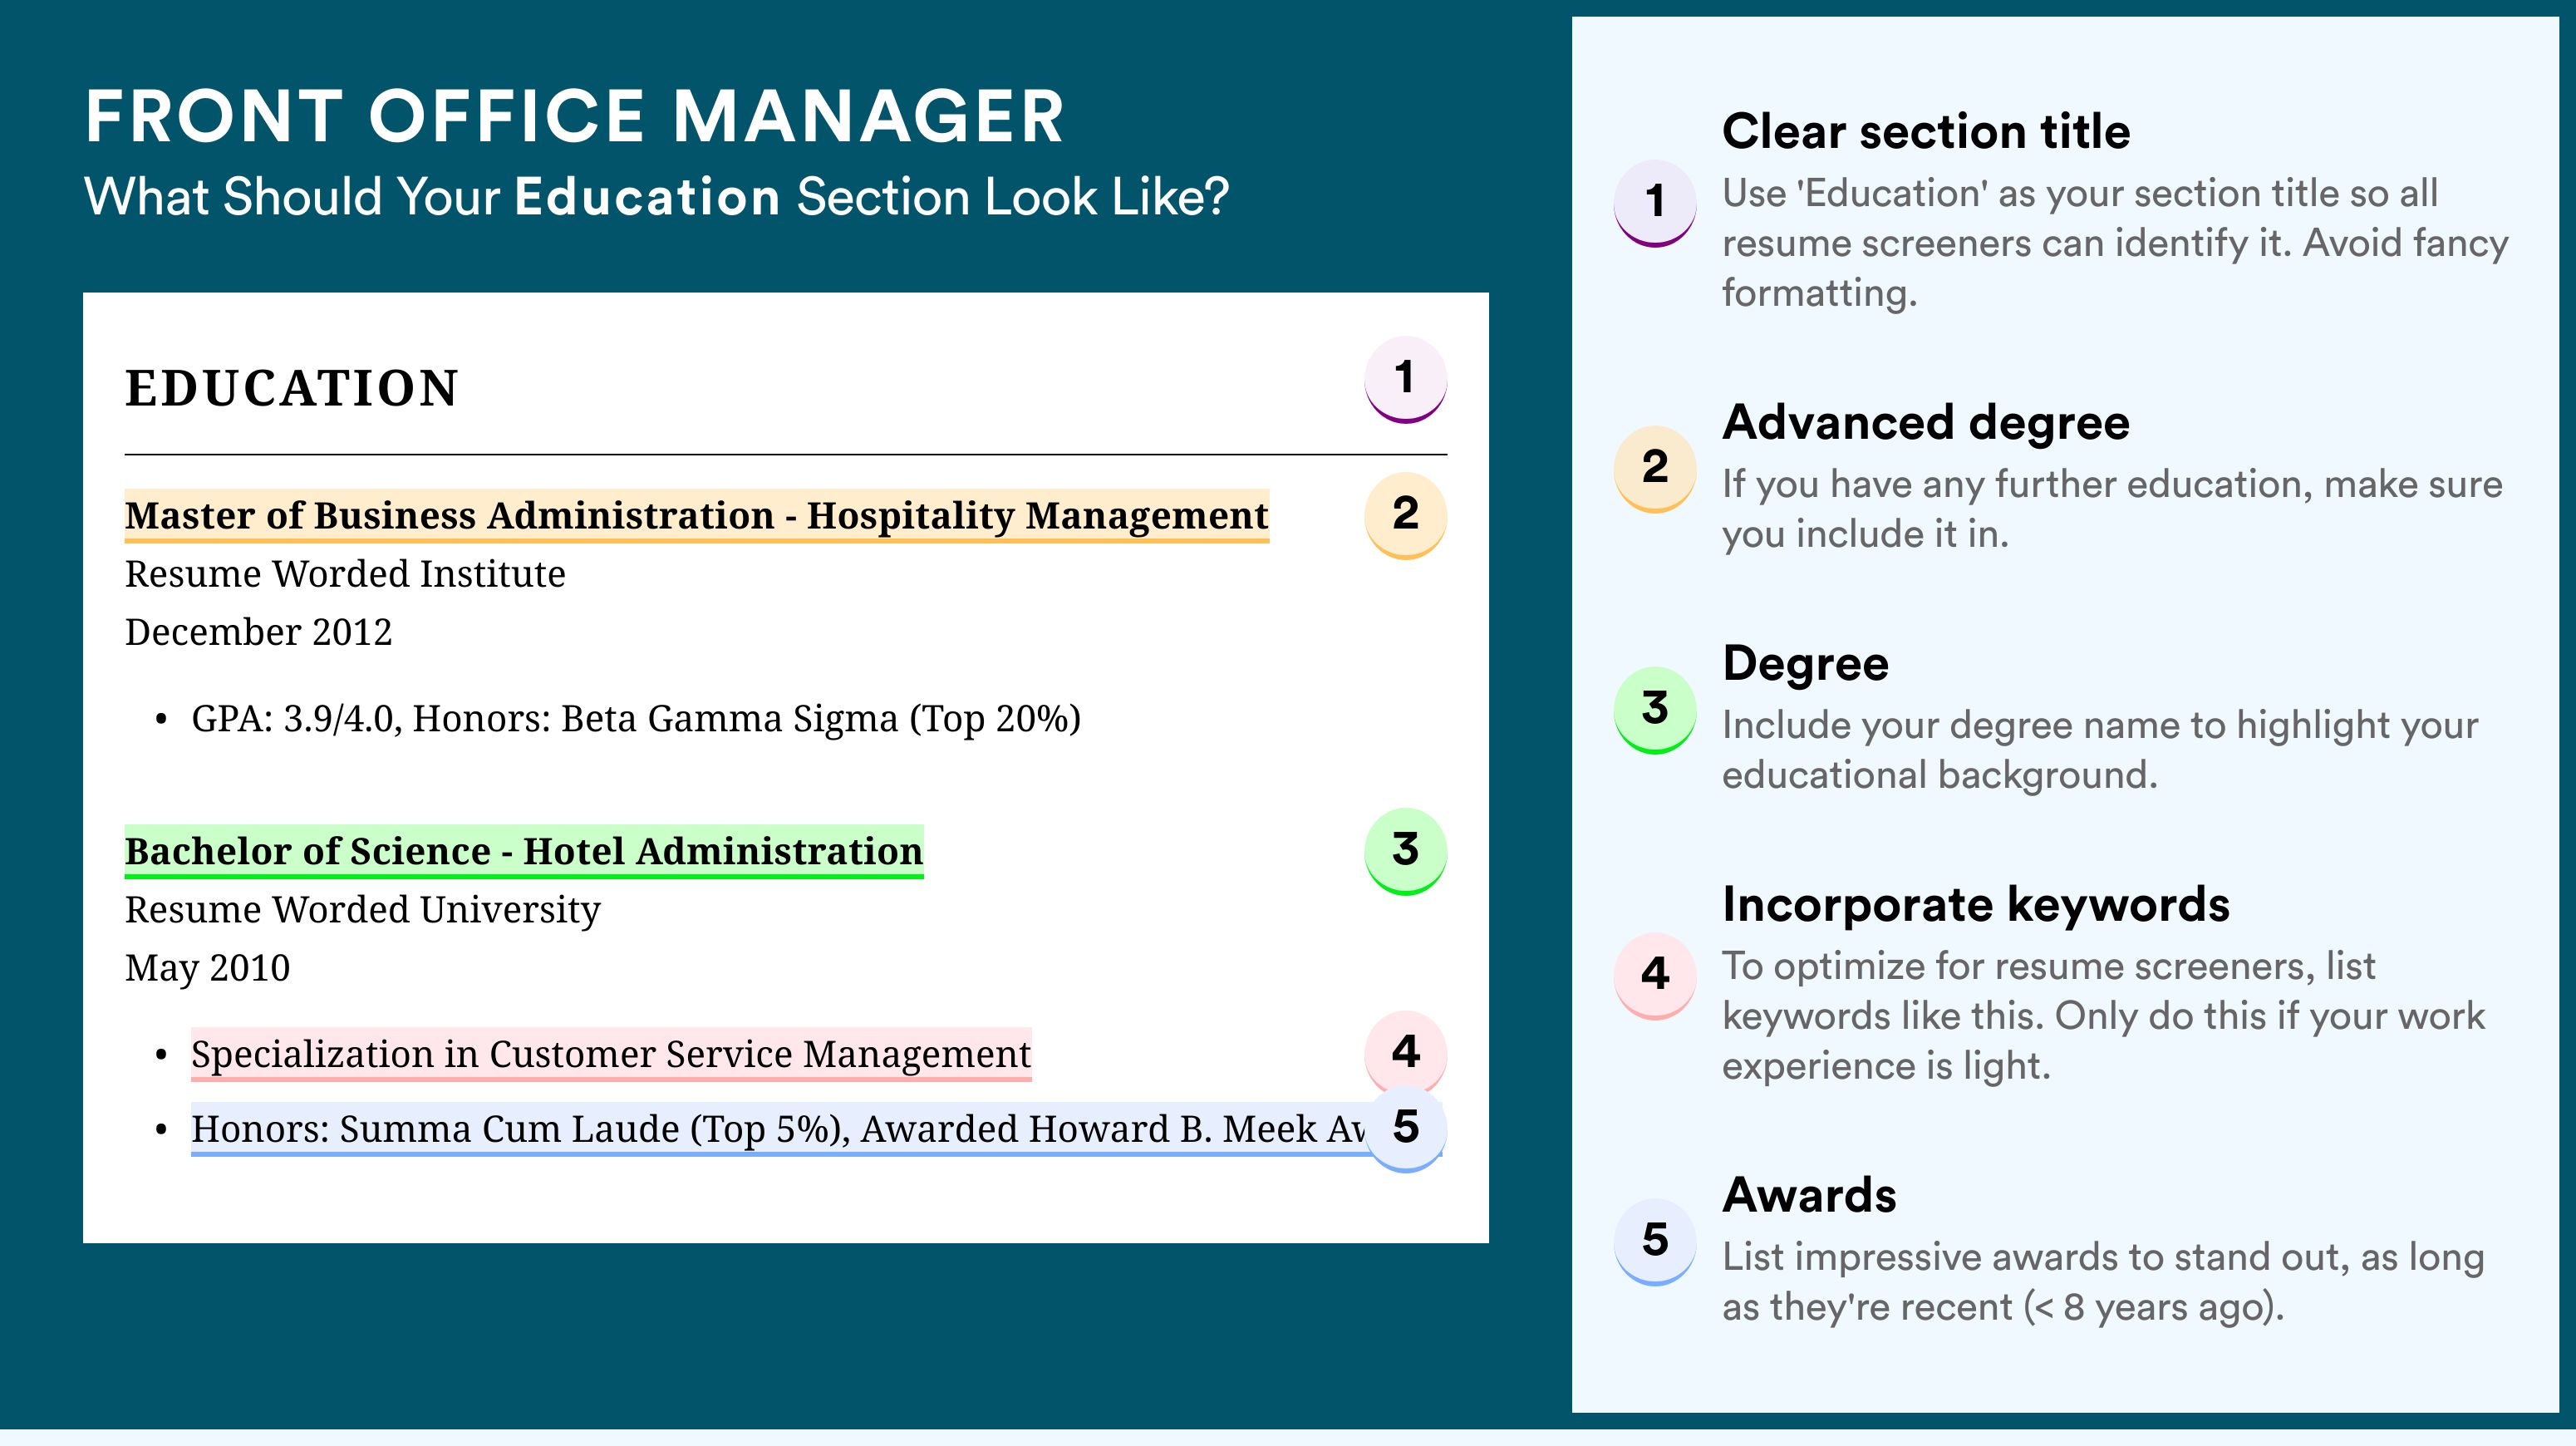 How To Write An Education Section - Front Office Manager Roles